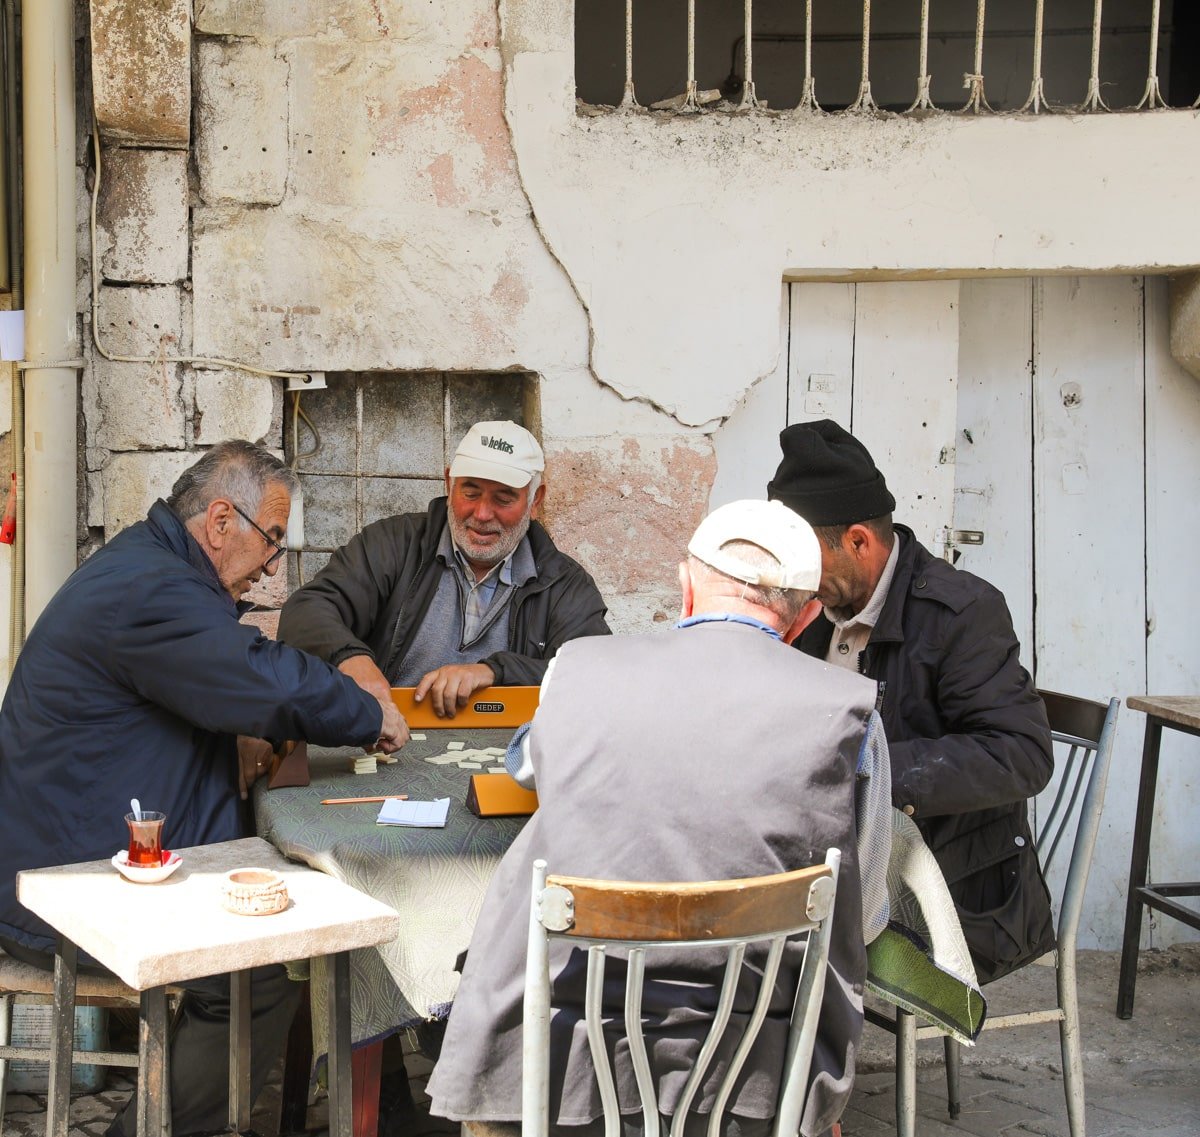 Four elderly men playing the board game Okey at an outdoor table near an old building wall in Avanos, Cappadocia, Türkiye, with one smiling broadly. Two are wearing caps.